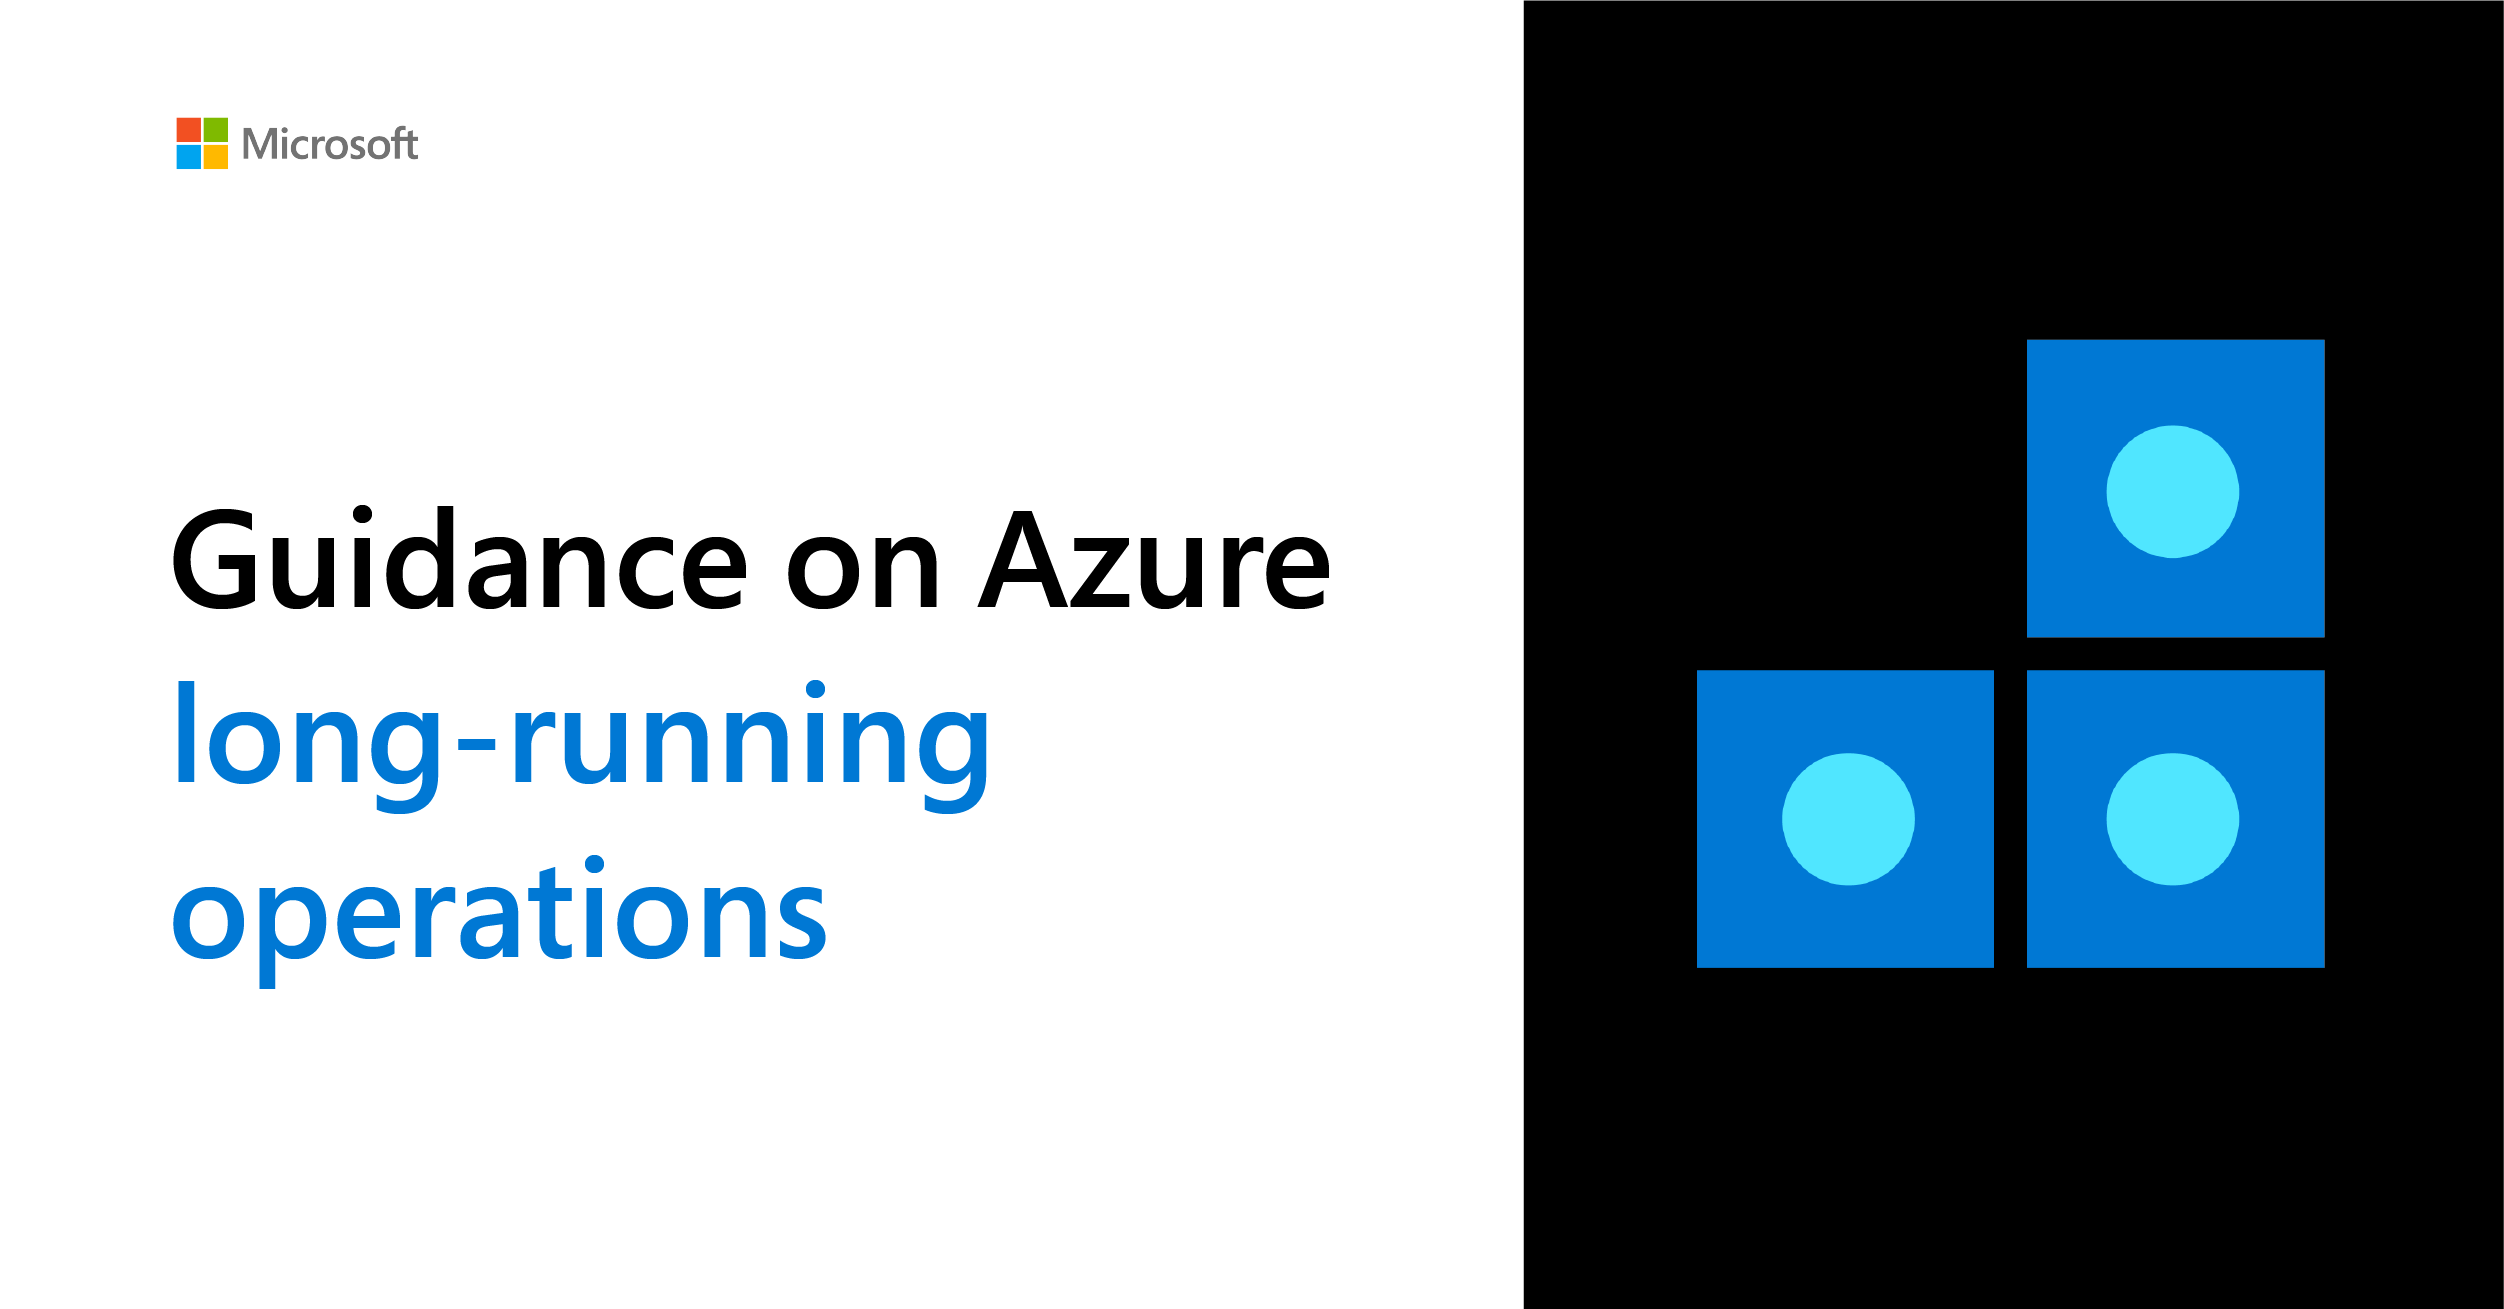 It just takes time. Updated guidance on Azure long-running operations.